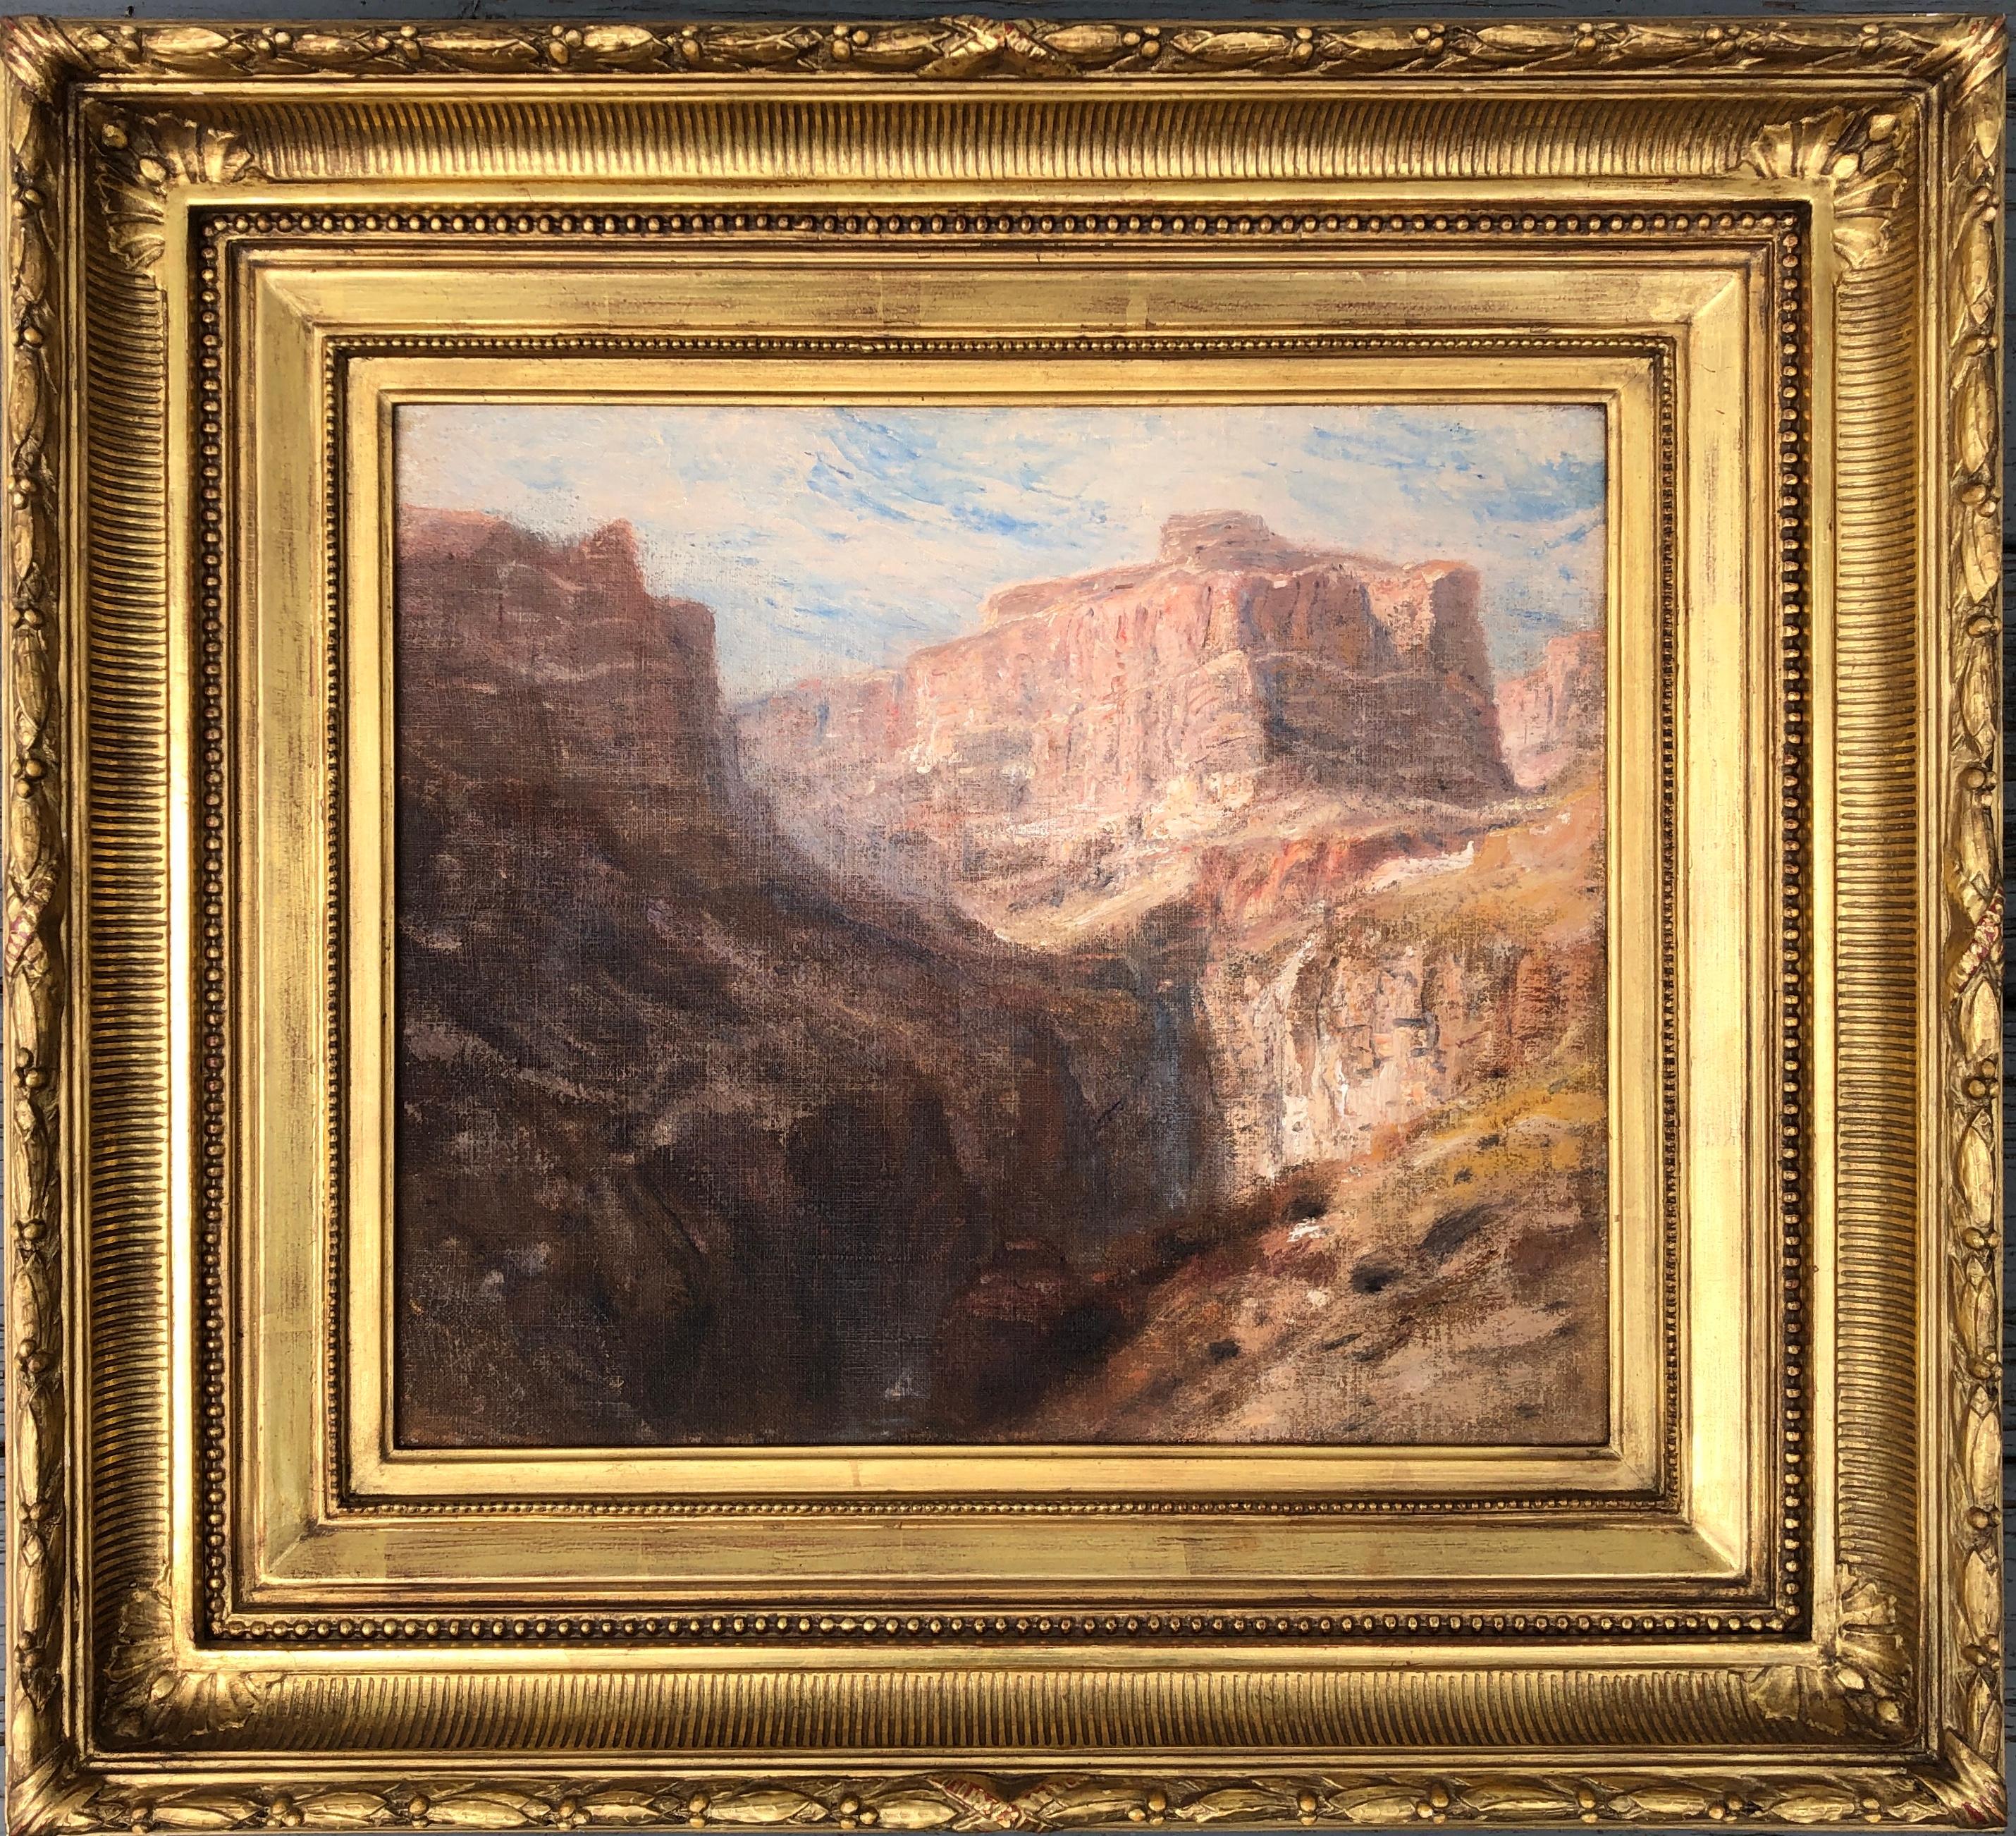 Tower of Babel, Colorado Canyon
12 ⅞" x 14 ½"
20 ¾" x 22 ¾" x 4 ¼" framed

Verso sketch of fall trees on a hillside.

Provenance: The estate of Samuel Colman. 
Purchased by private collection, Florida, circa 1970 directly from the prominent NYC